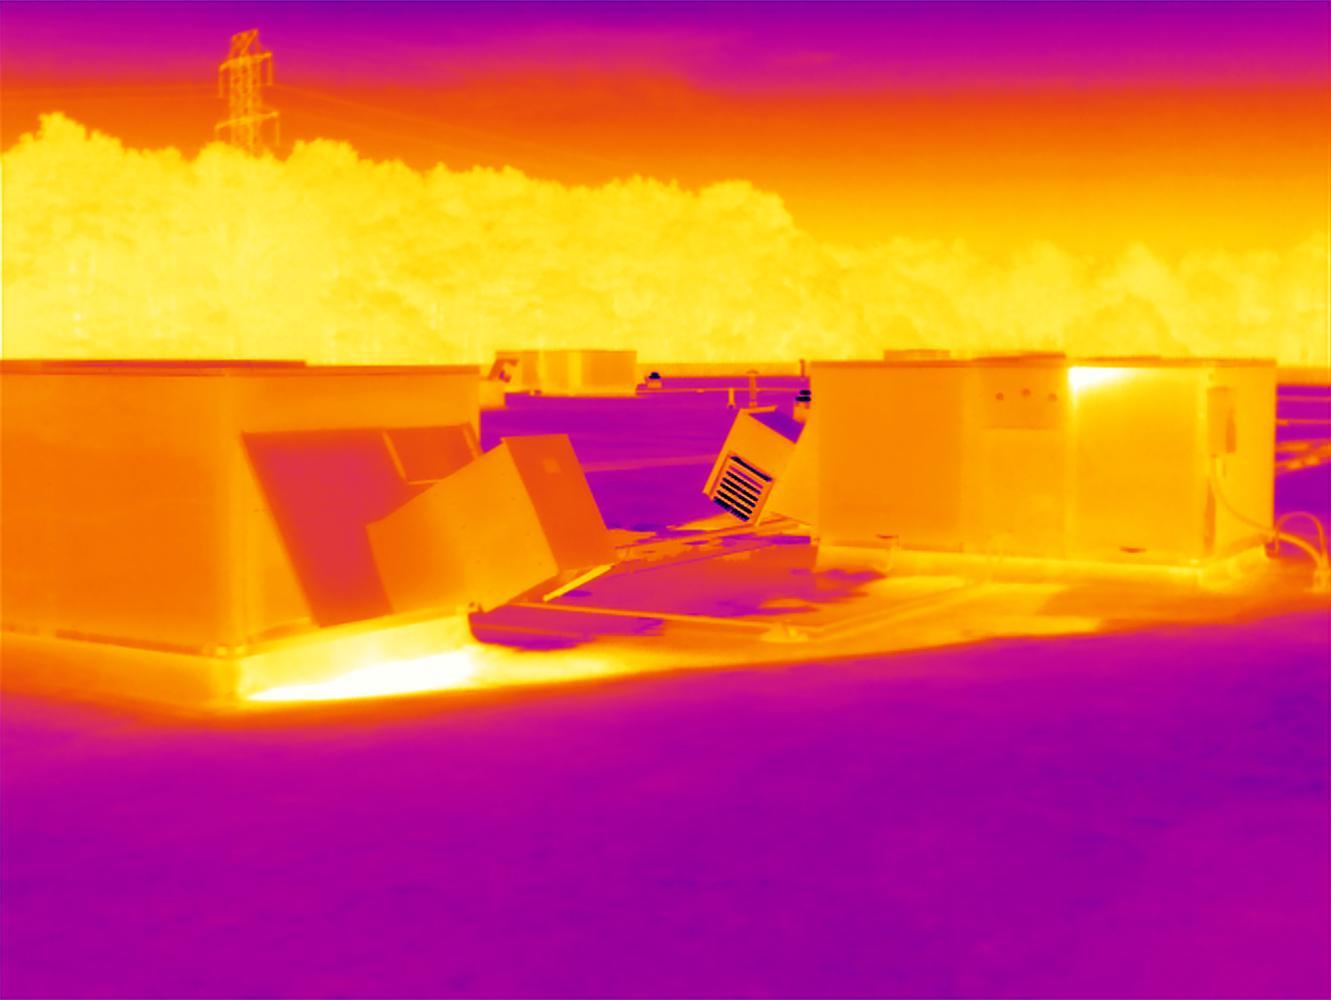 Commercial & Residential Infrared Moisture Survey/Inspections of Flat & Low Sloped Roofs in NJ